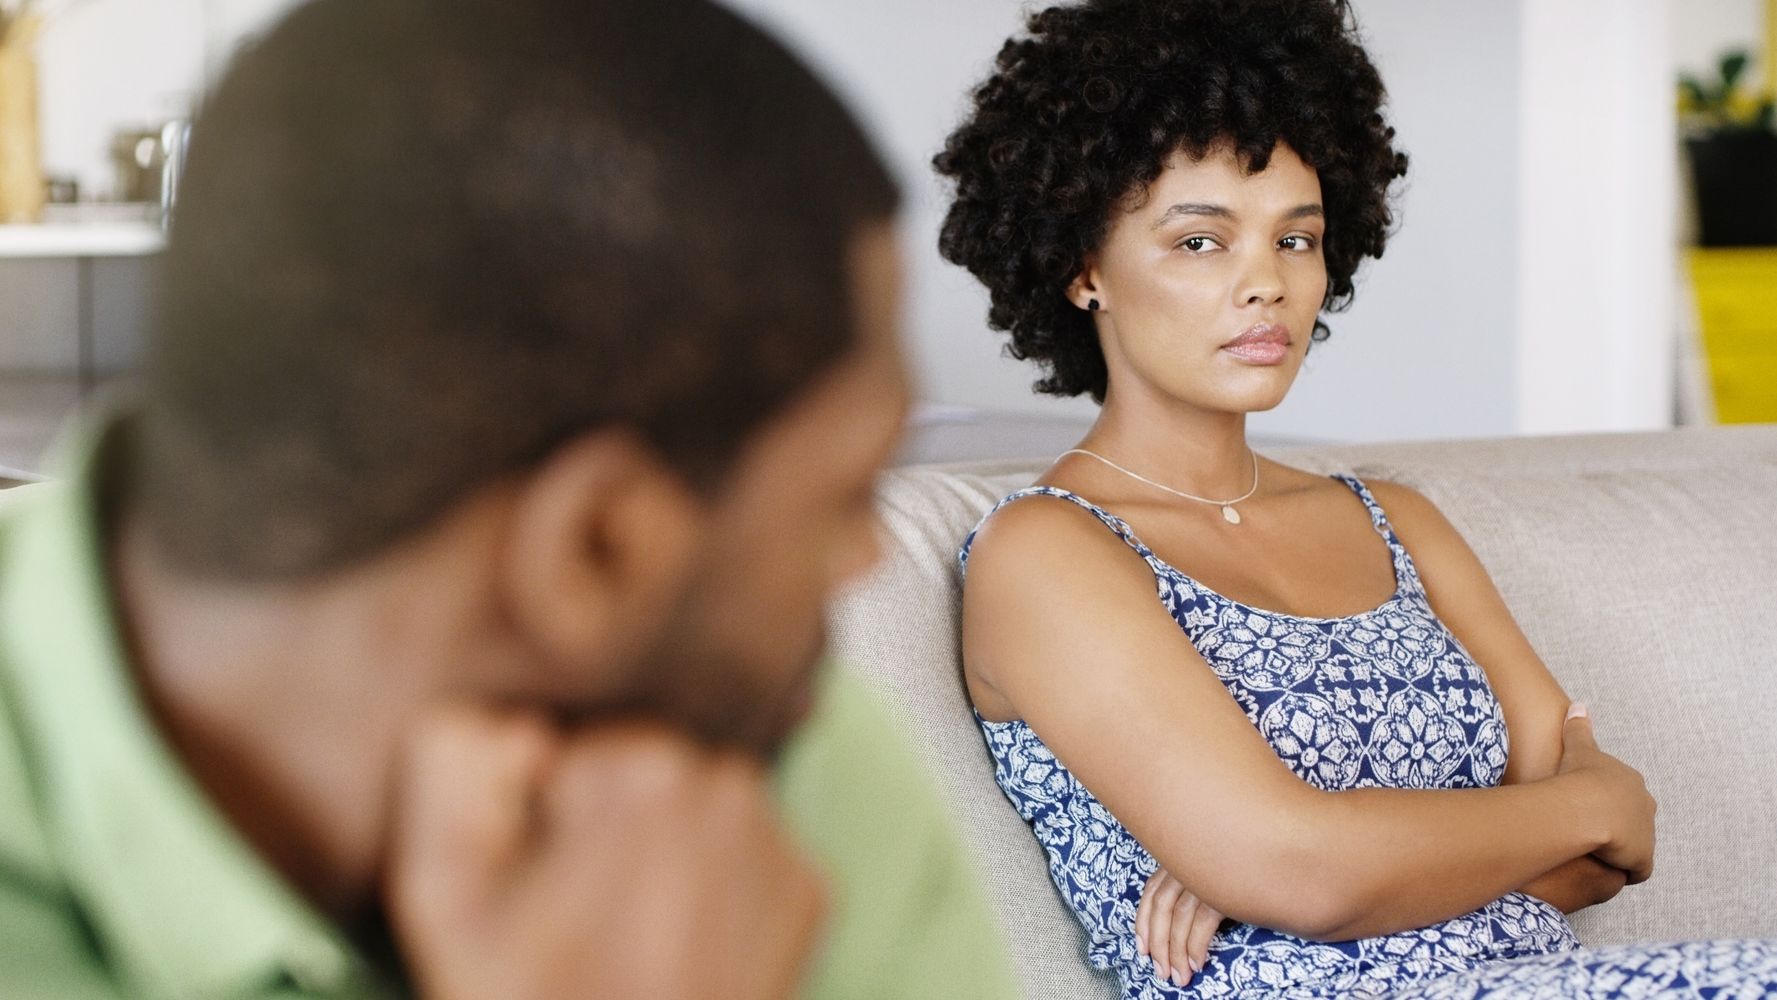 What Therapists Consider Of Staying In A ‘So-So’ Marriage